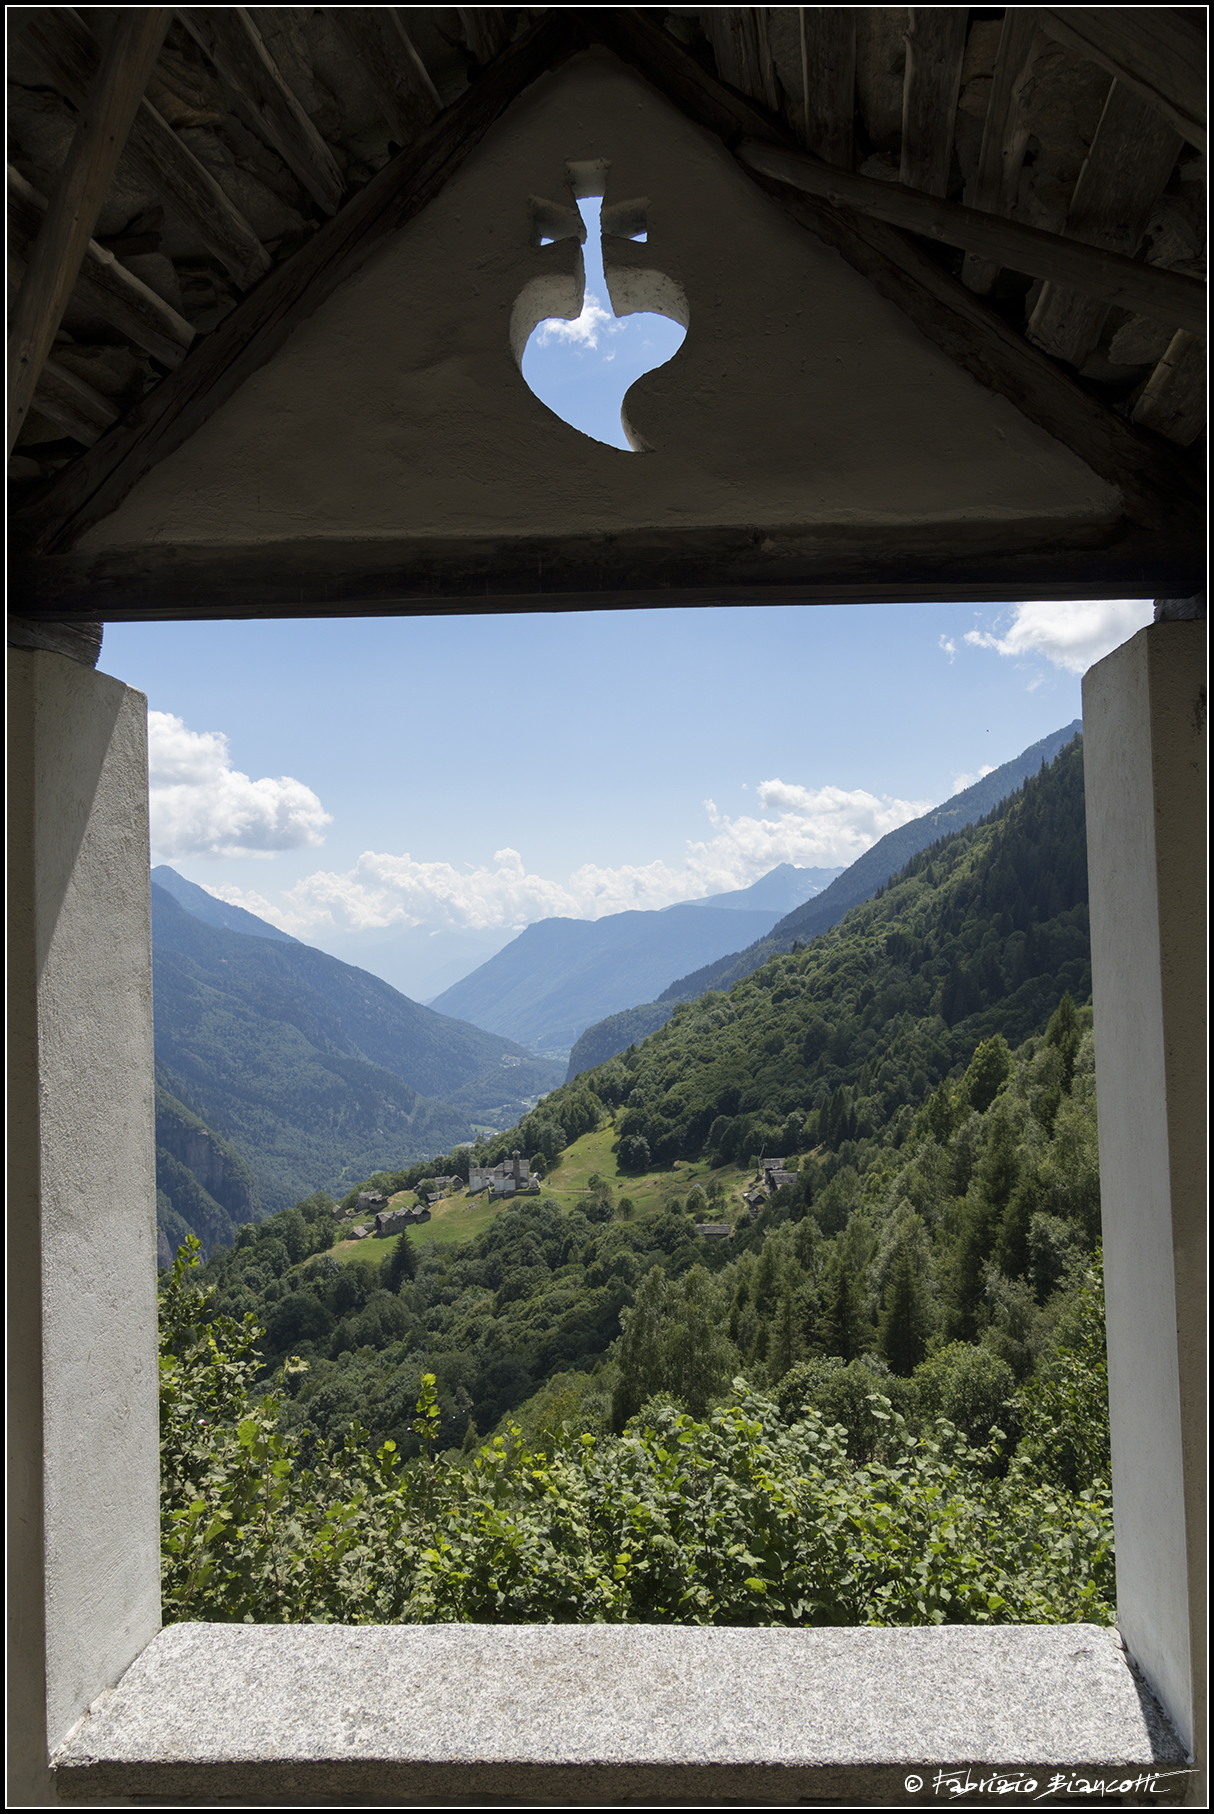 A window on Lower Salecchio...